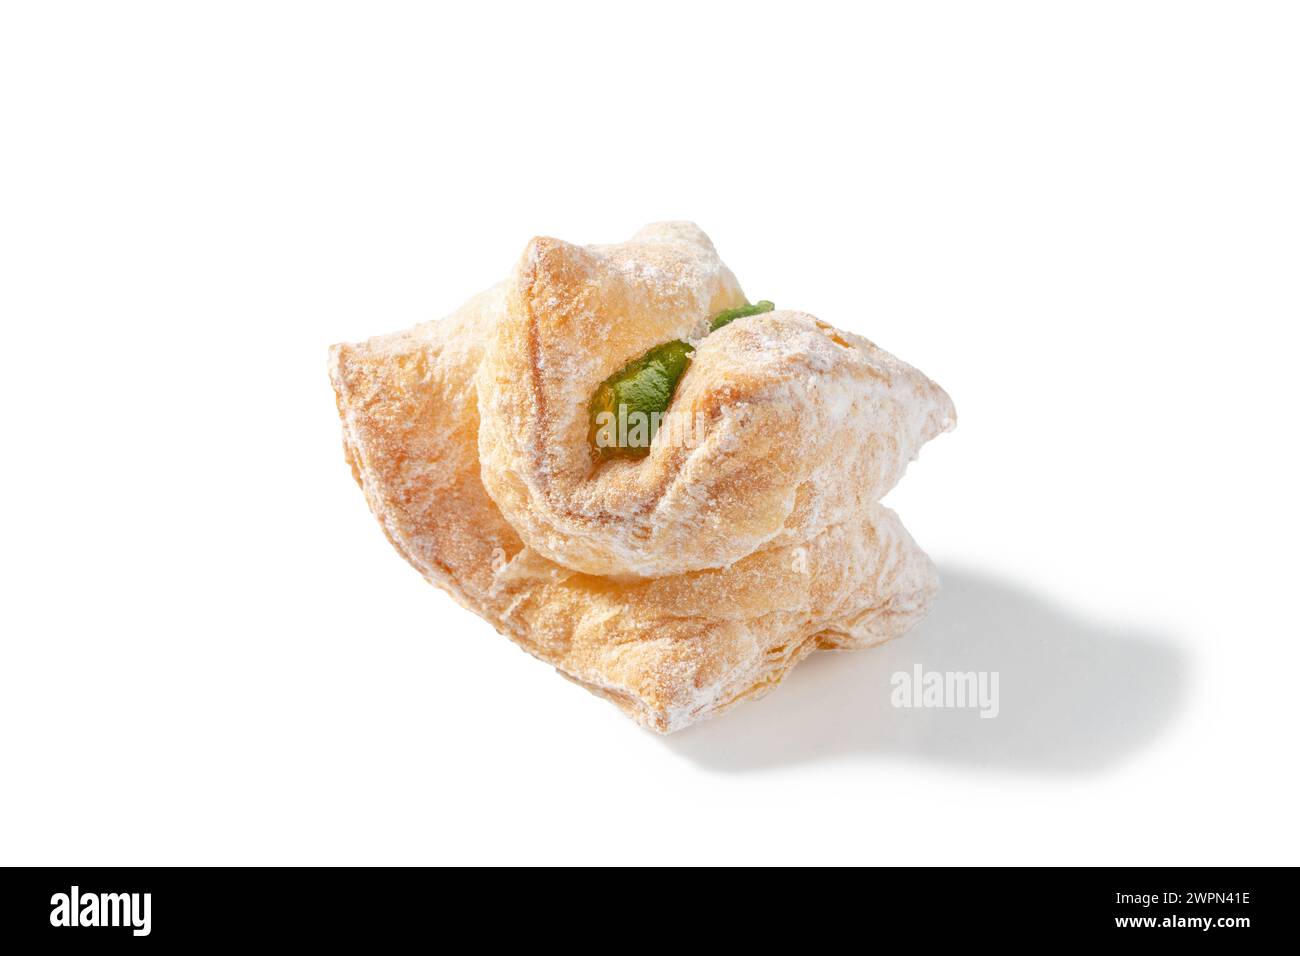 A delightful treat featuring flaky puff pastry filled with green Turkish Delight and dusted with a veil of powdered sugar Stock Photo